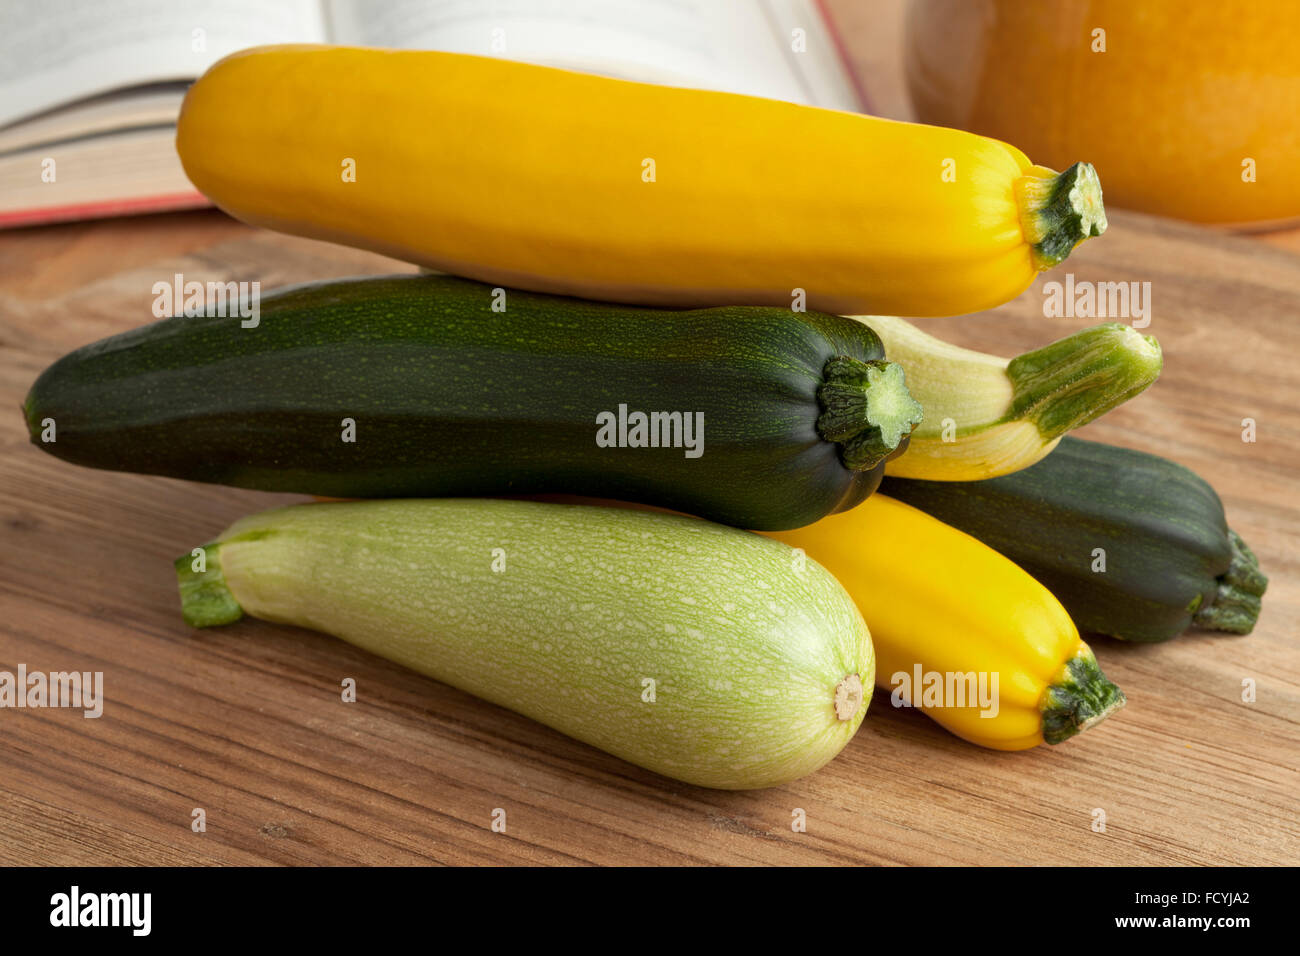 Pile of fresh raw courgettes in different colors Stock Photo